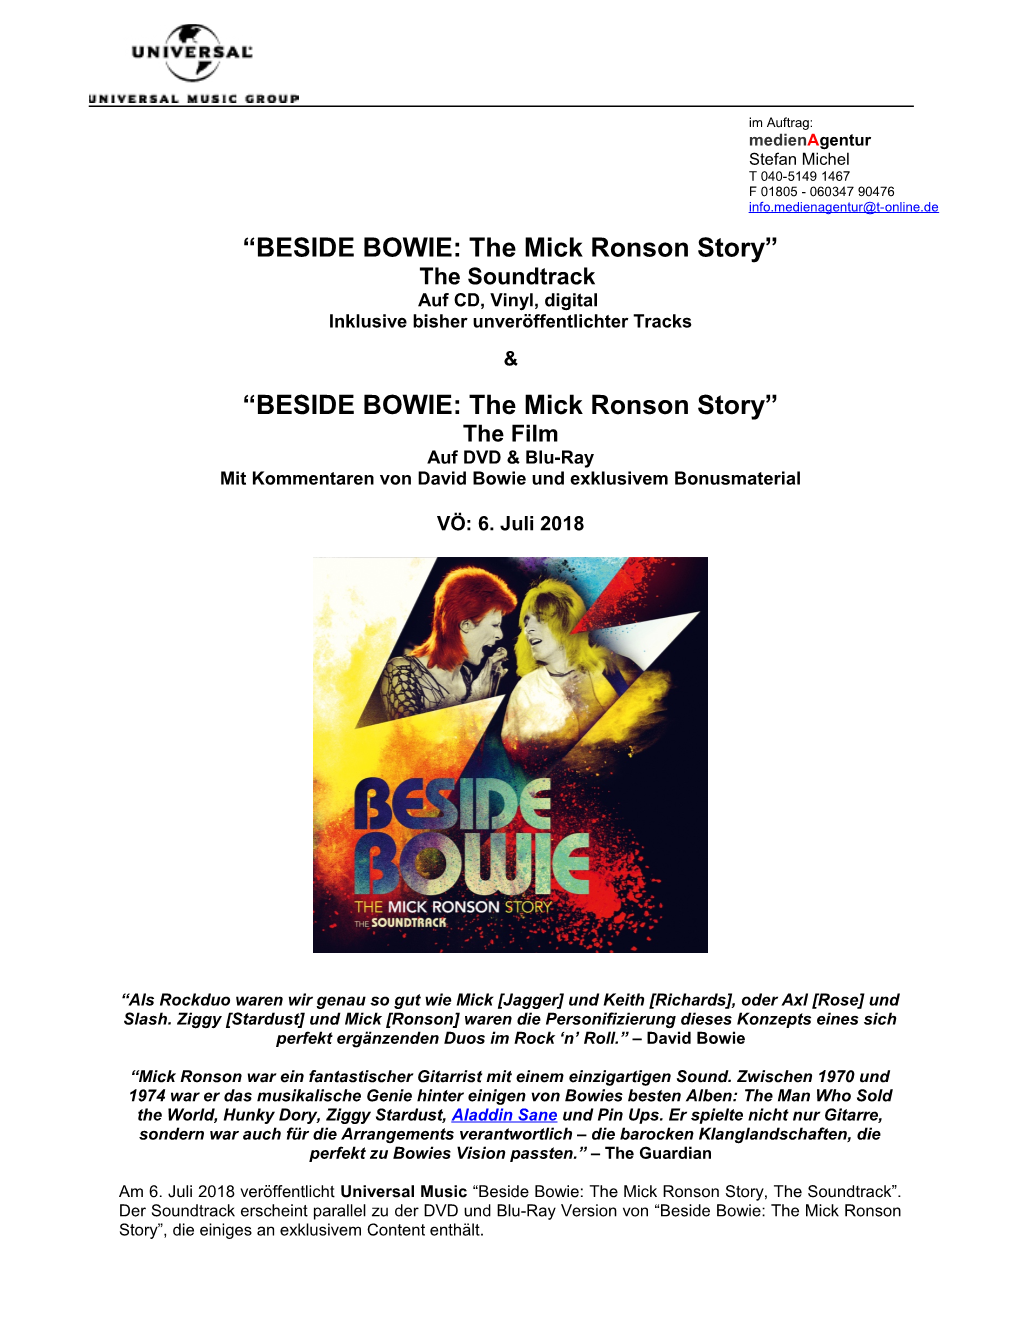 BESIDE BOWIE: the Mick Ronson Story